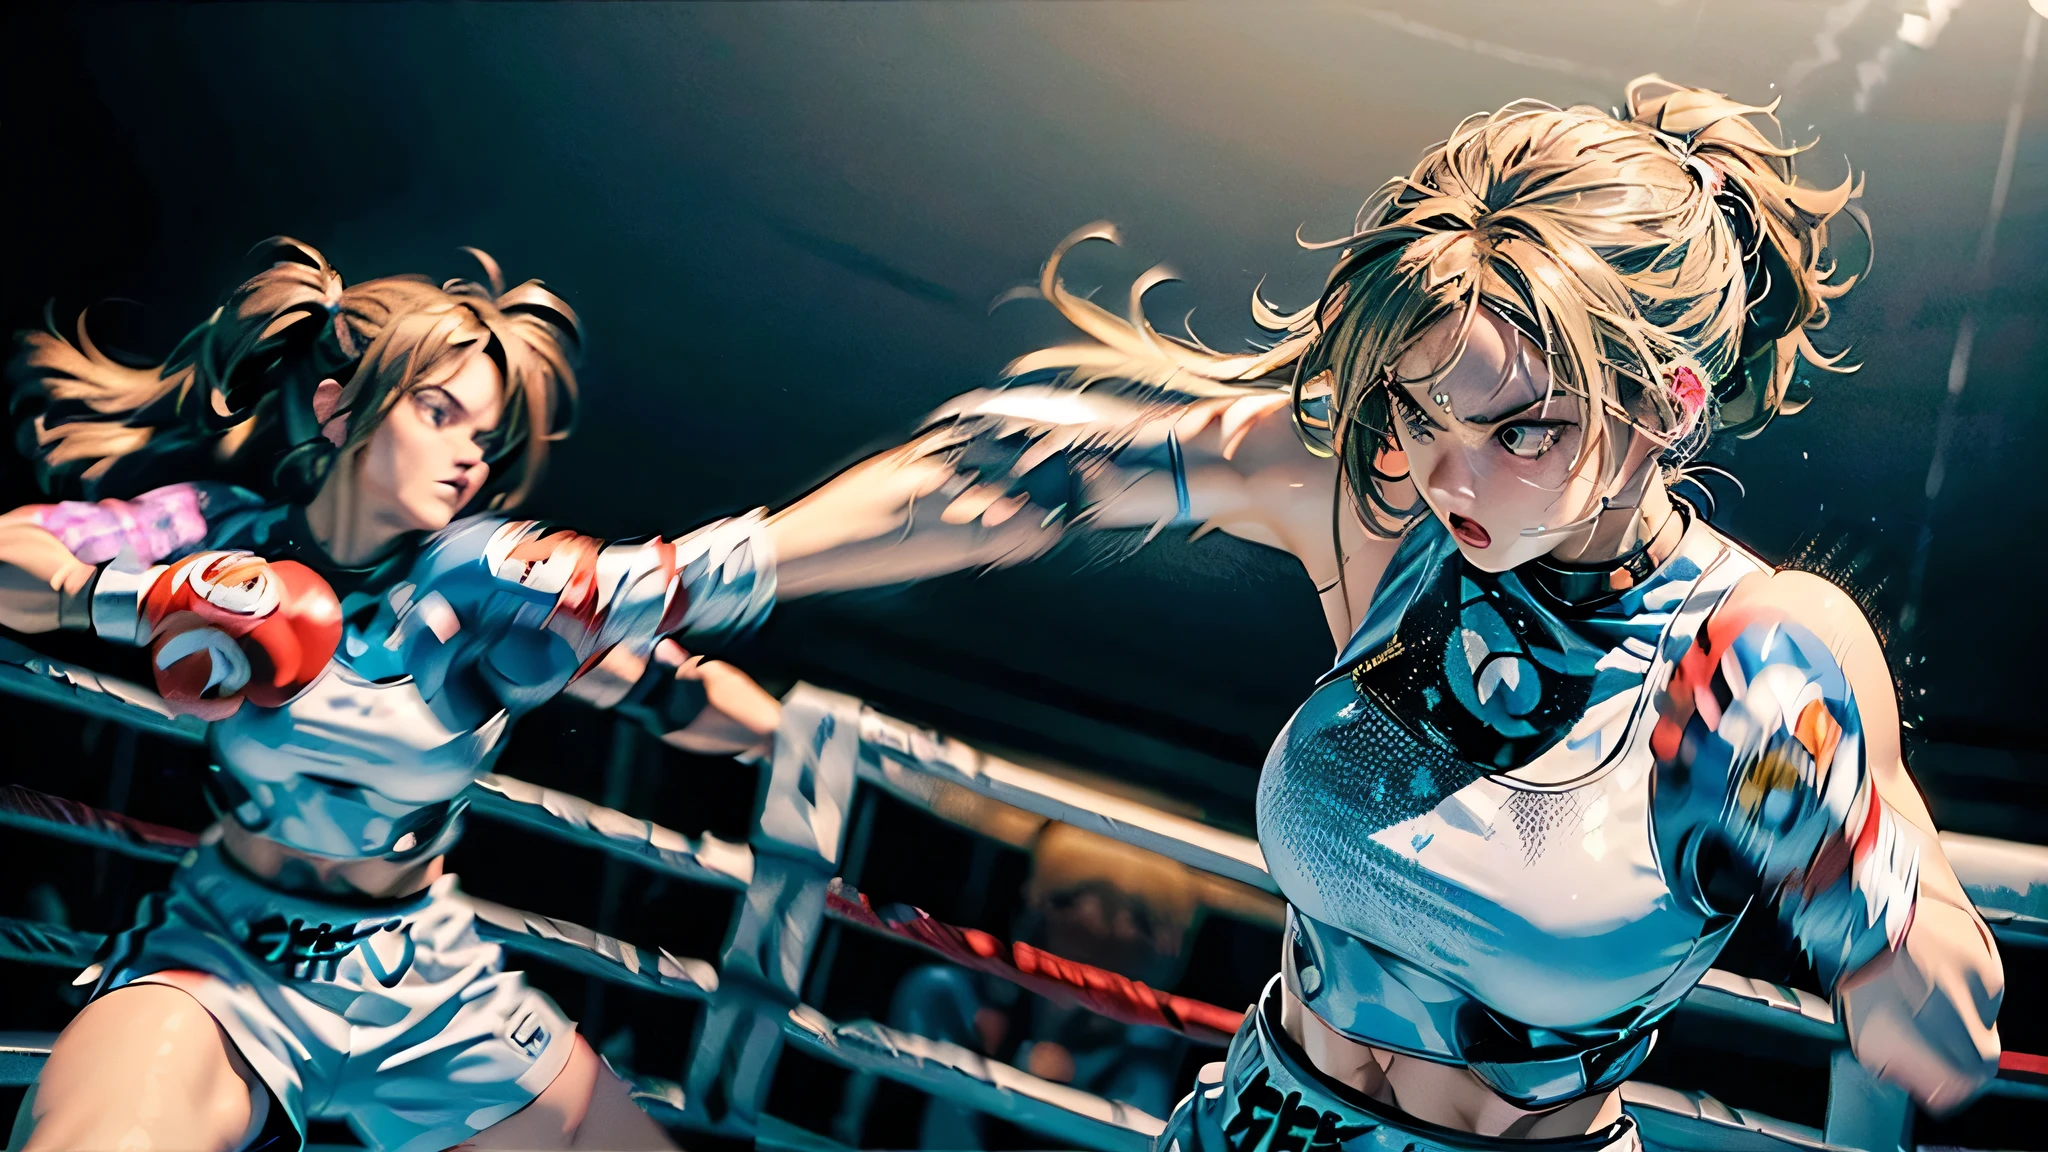 8k wallpaper of extremely detailed CG unit, ​masterpiece, hight resolution, top-quality, top-quality real texture skin,hyper realisitic, digitial painting,increase the resolution,RAW photosbest qualtiy,highly detailed,the wallpaper,two teen women,two teen women are hard pancing each other at boxing fight,2women,teen,cute,kawaii,hair floating,messy hair,blonde hair and dark hair,messy hair,pony tail hair and short hair,skin color white,eye color blue or dark,eyes shining,big eyes,breast,sports wear,angry face,punching each other,(boxing gloves:1.6),(dynamic pose:1.8),(dynamic angle:2.0),sweat, BREAK ,(motion blur on gloves:1.8),boxing ring,1referee,audiences,[nsfw:2.0],